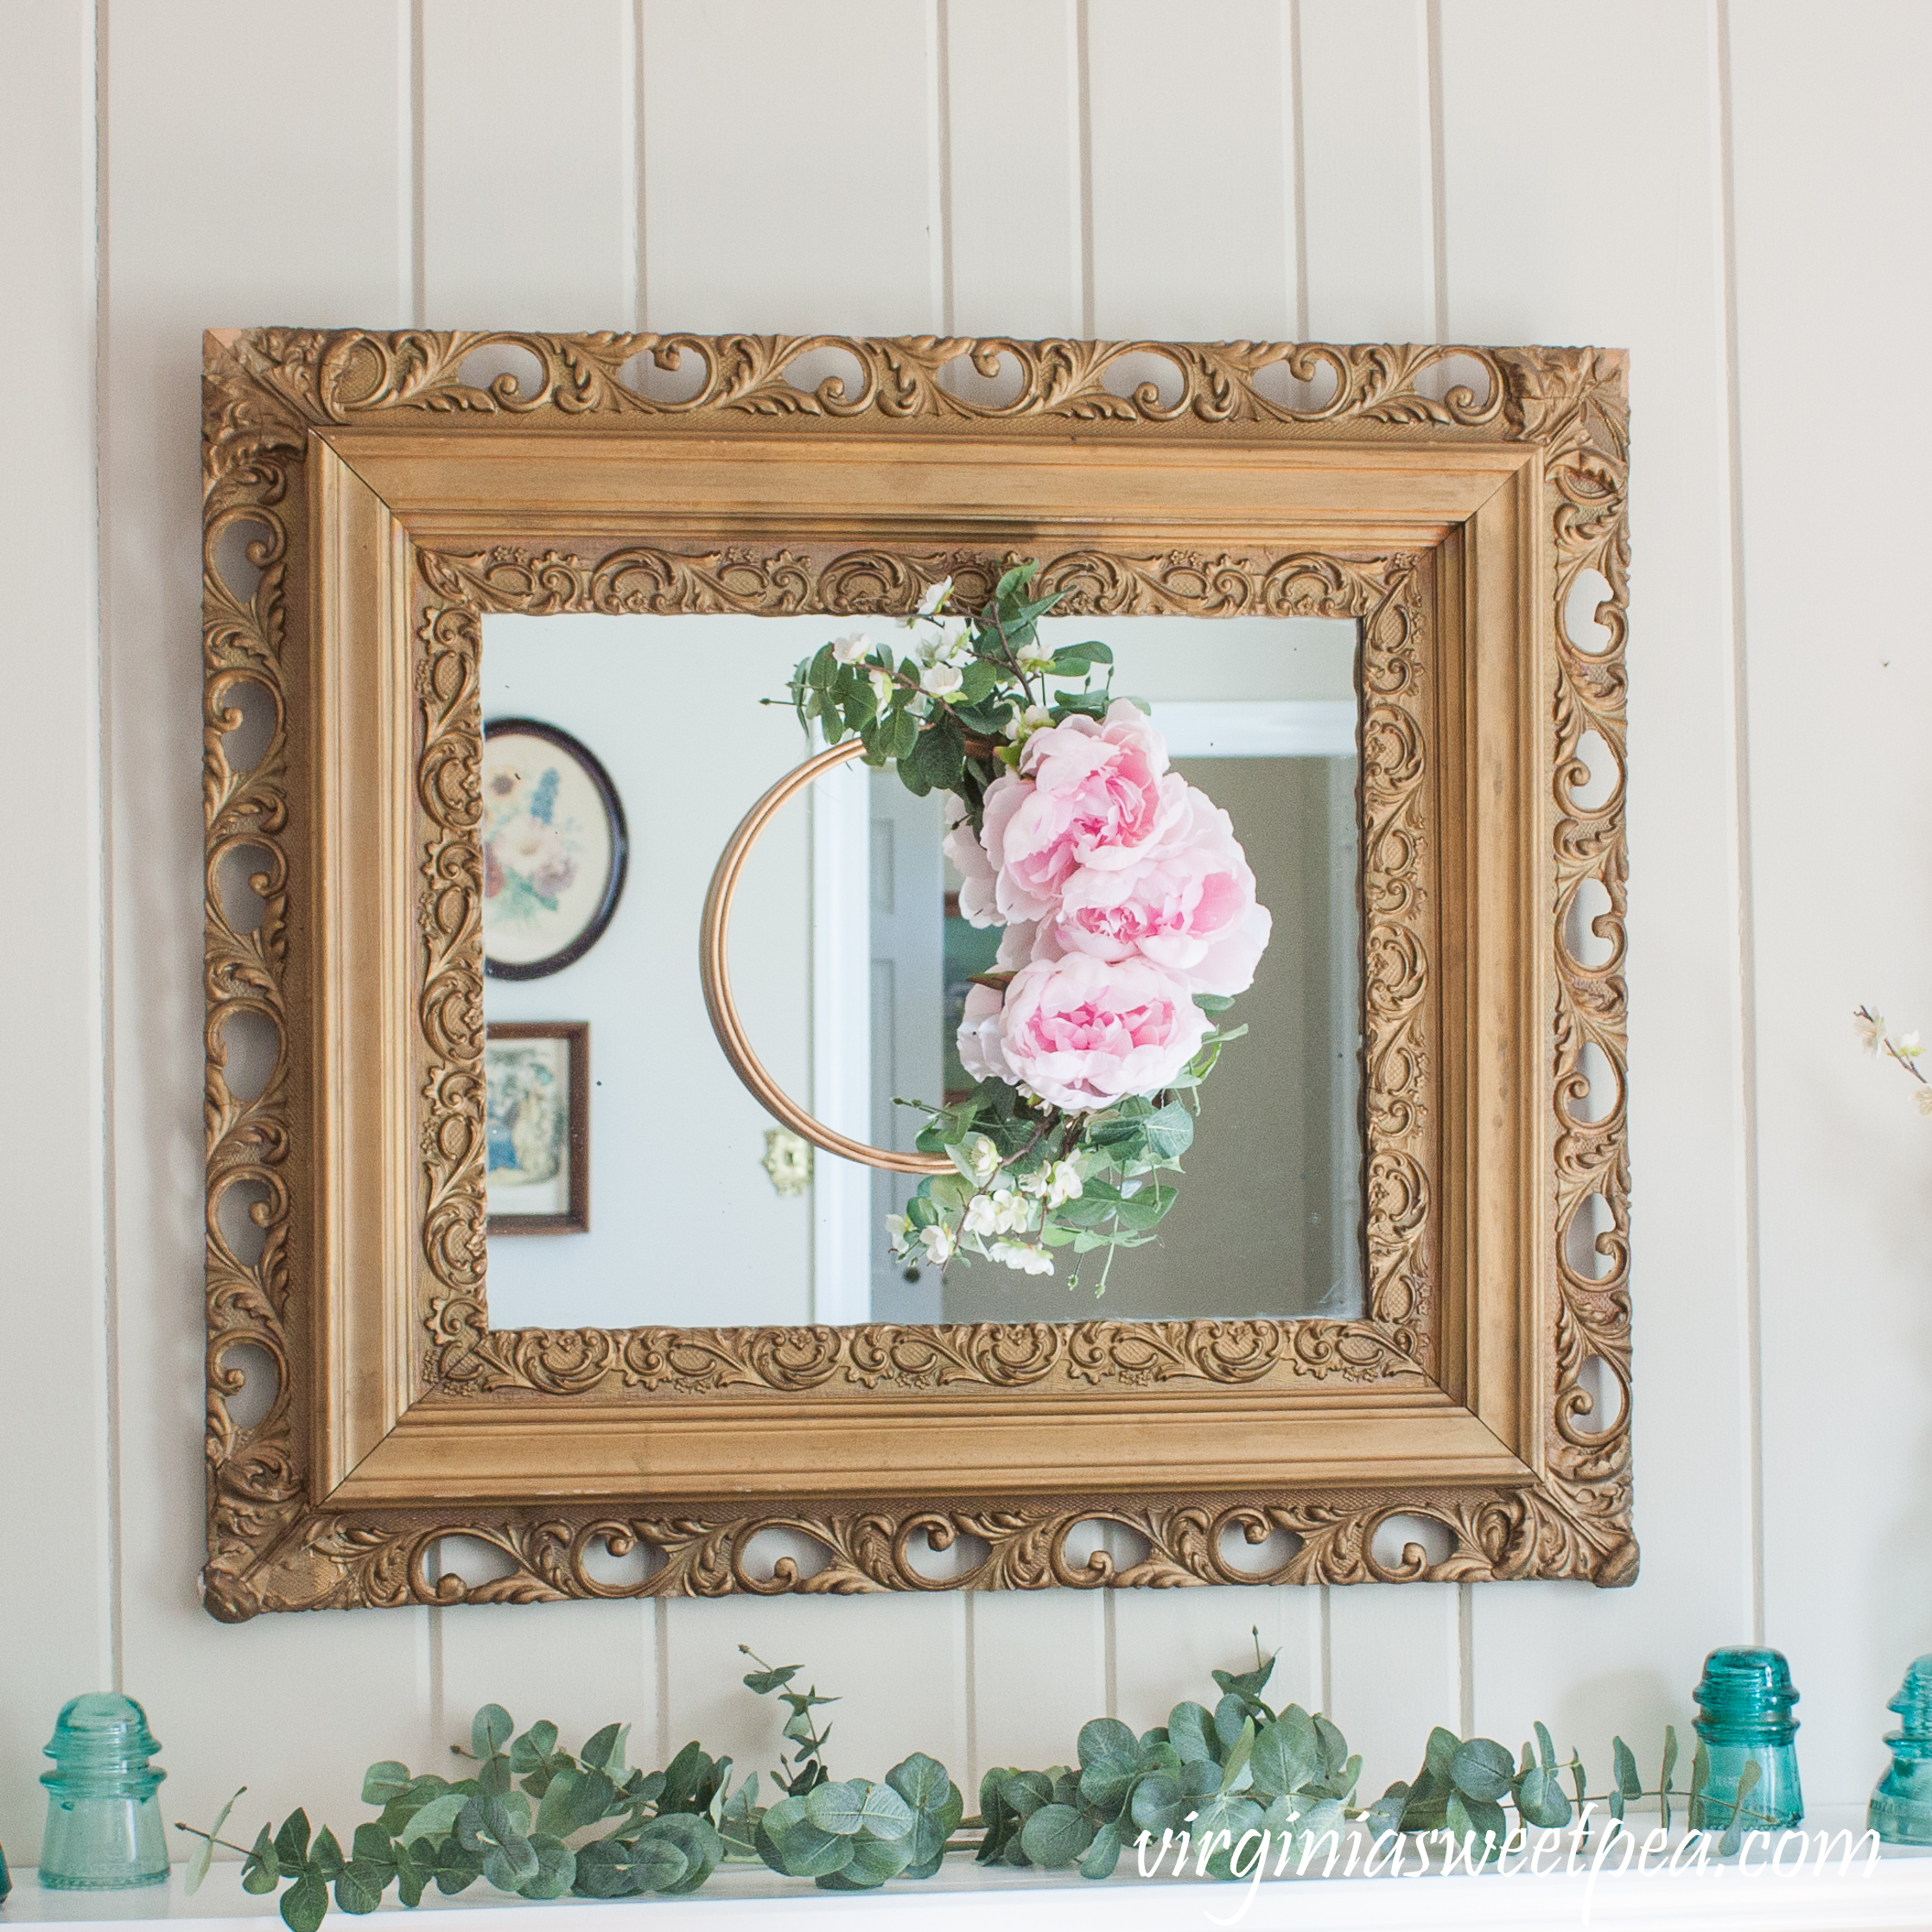 DIY Embroidery Hoop Wreath - Get the tutorial to make this wreath for your home. #wreath #springwreath #wreathtutorial #springcraft #springmantel